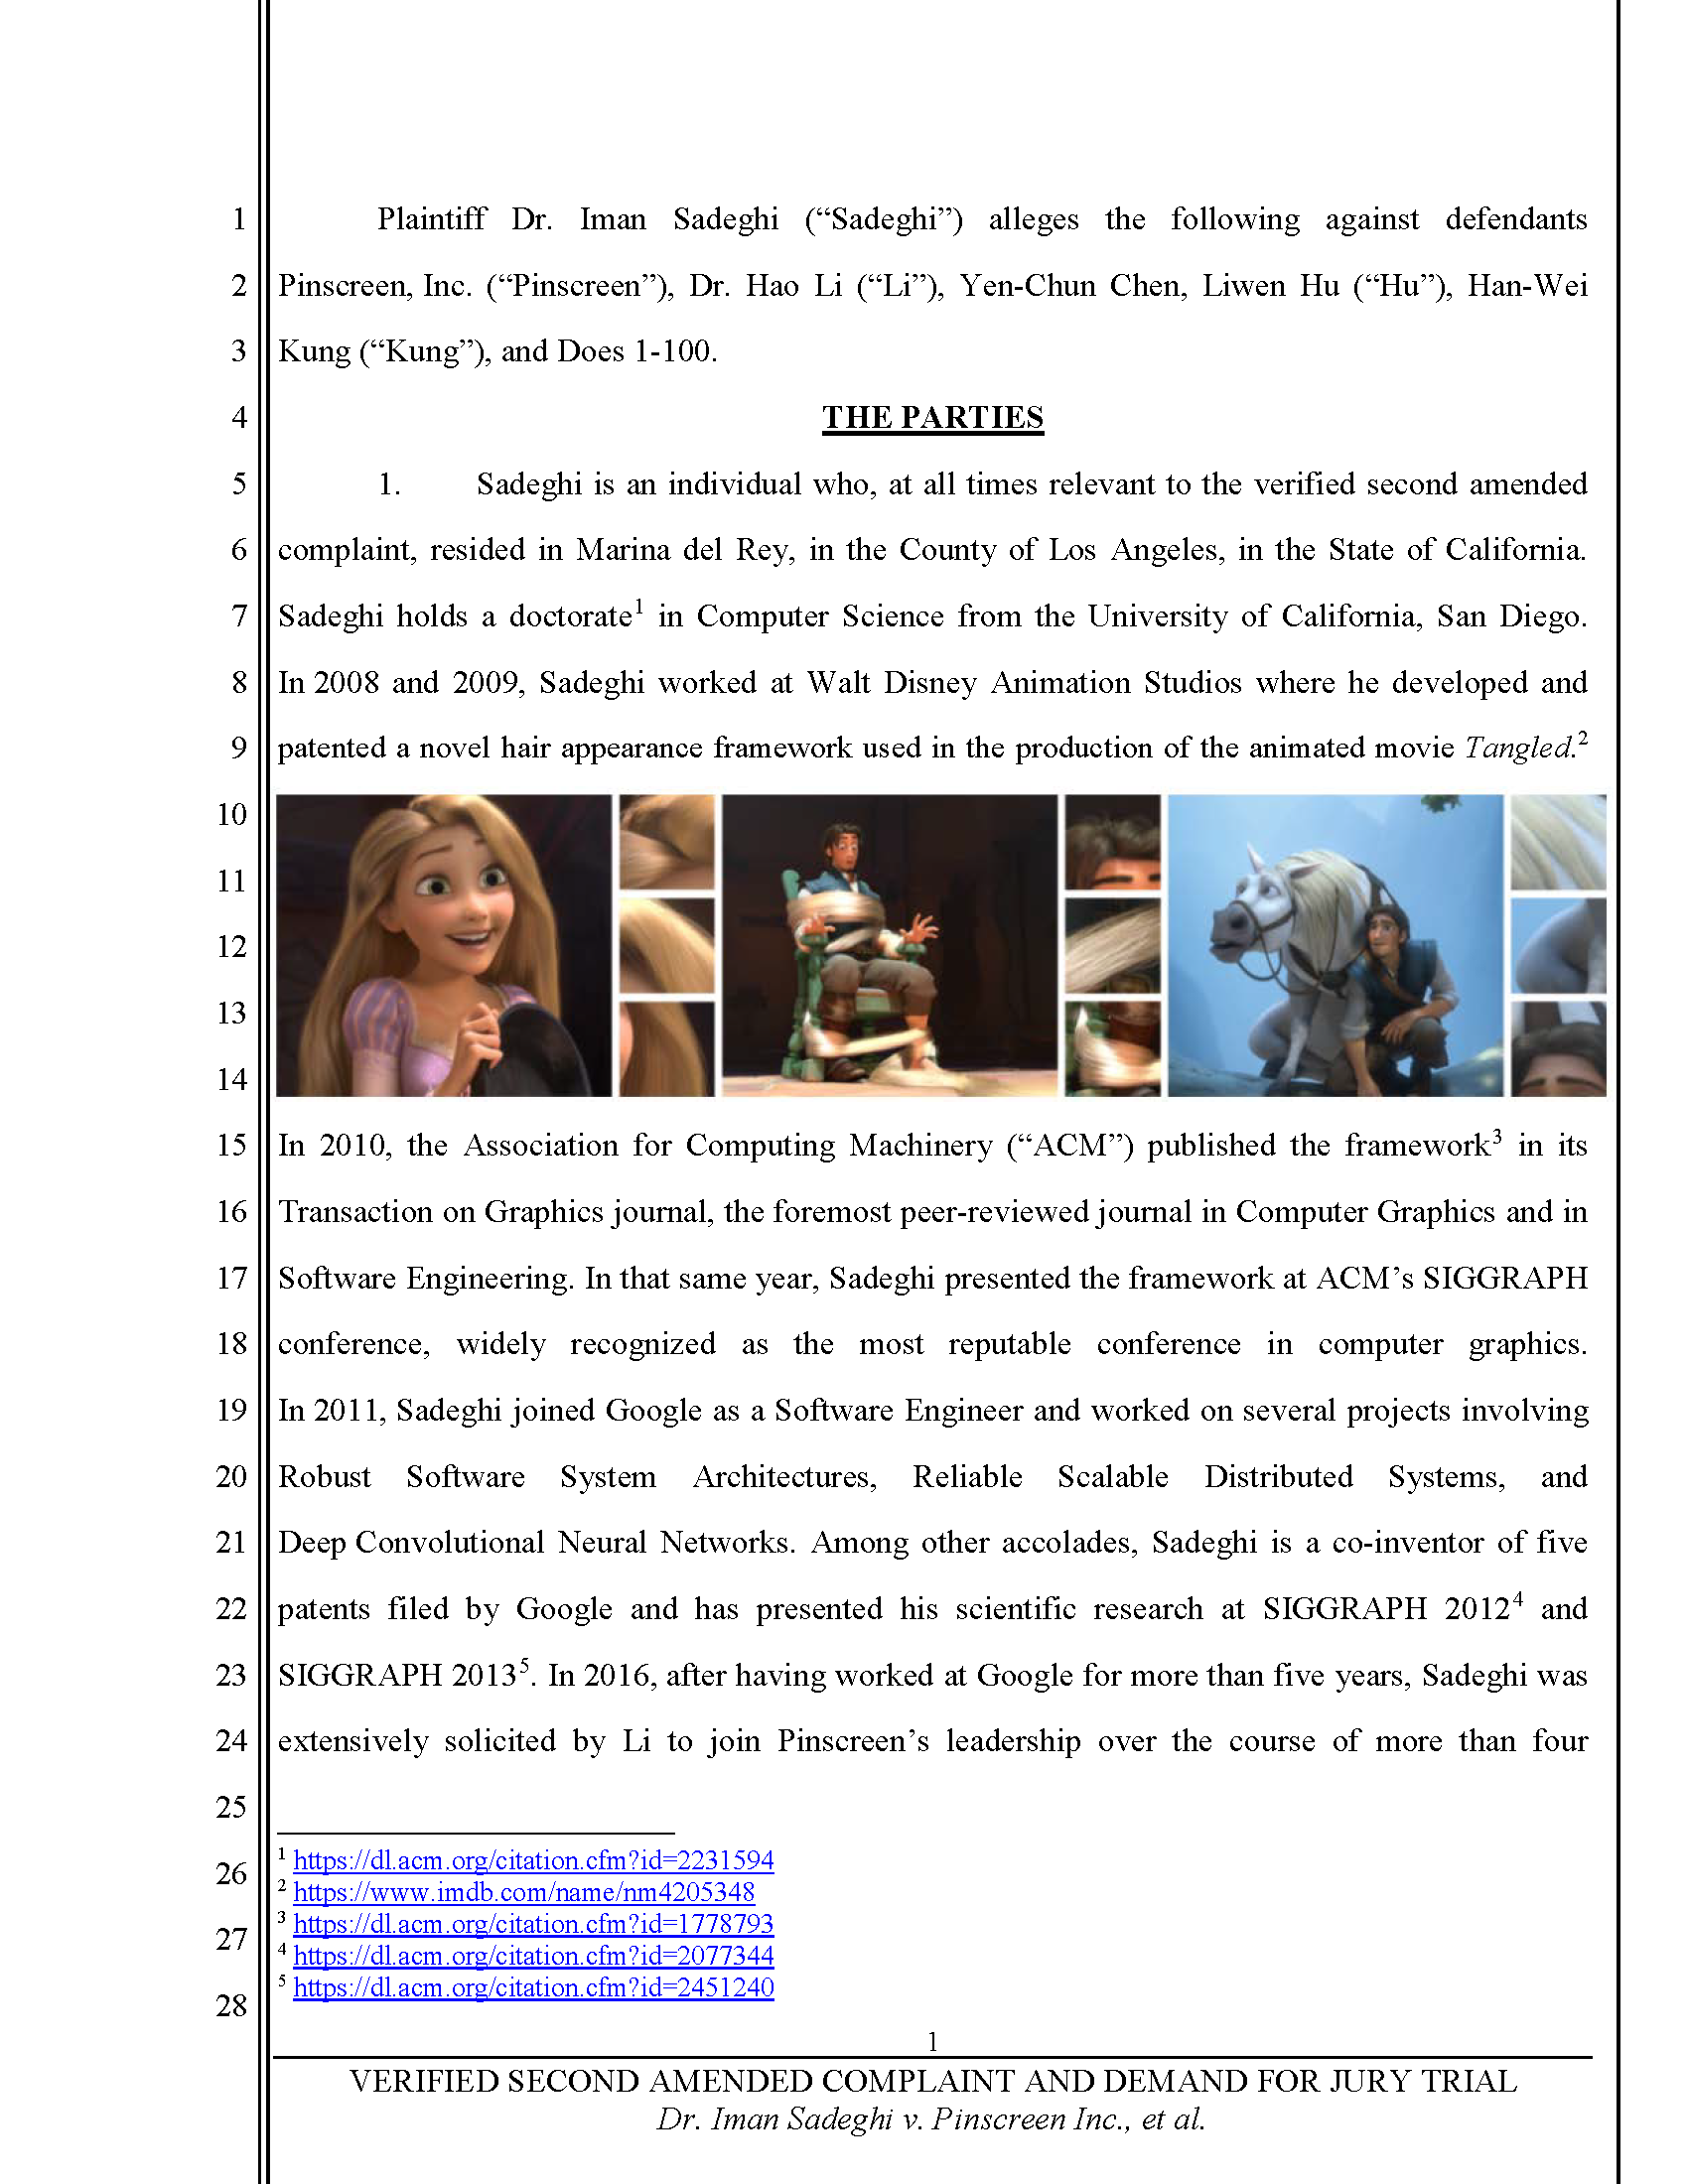 Second Amended Complaint (SAC) Page 2